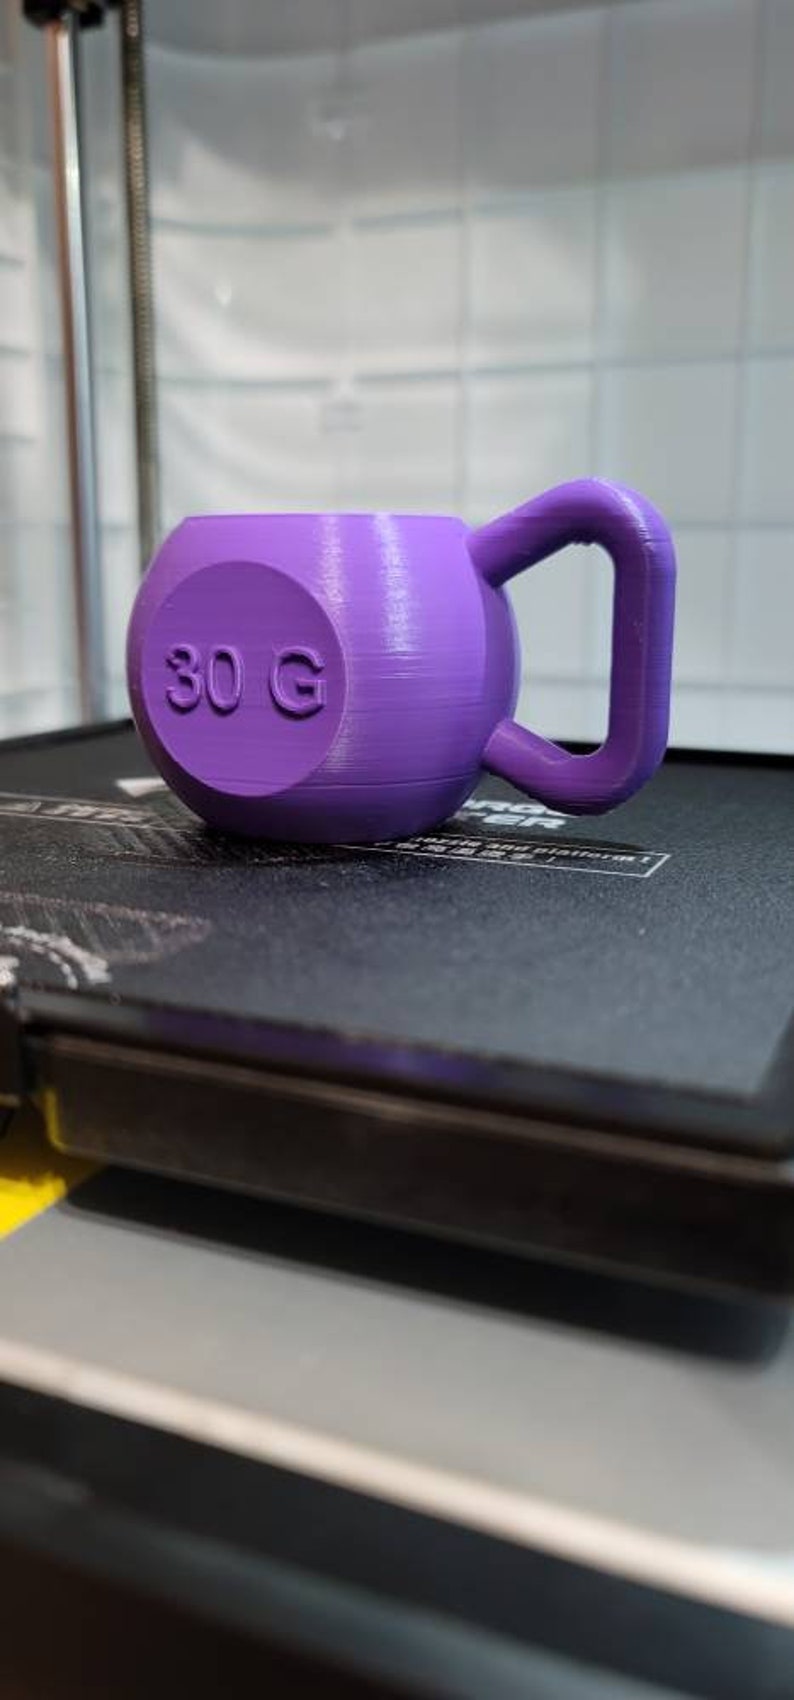 KETTLEBELL PROTEIN SCOOP 30G 3D Printed image 8